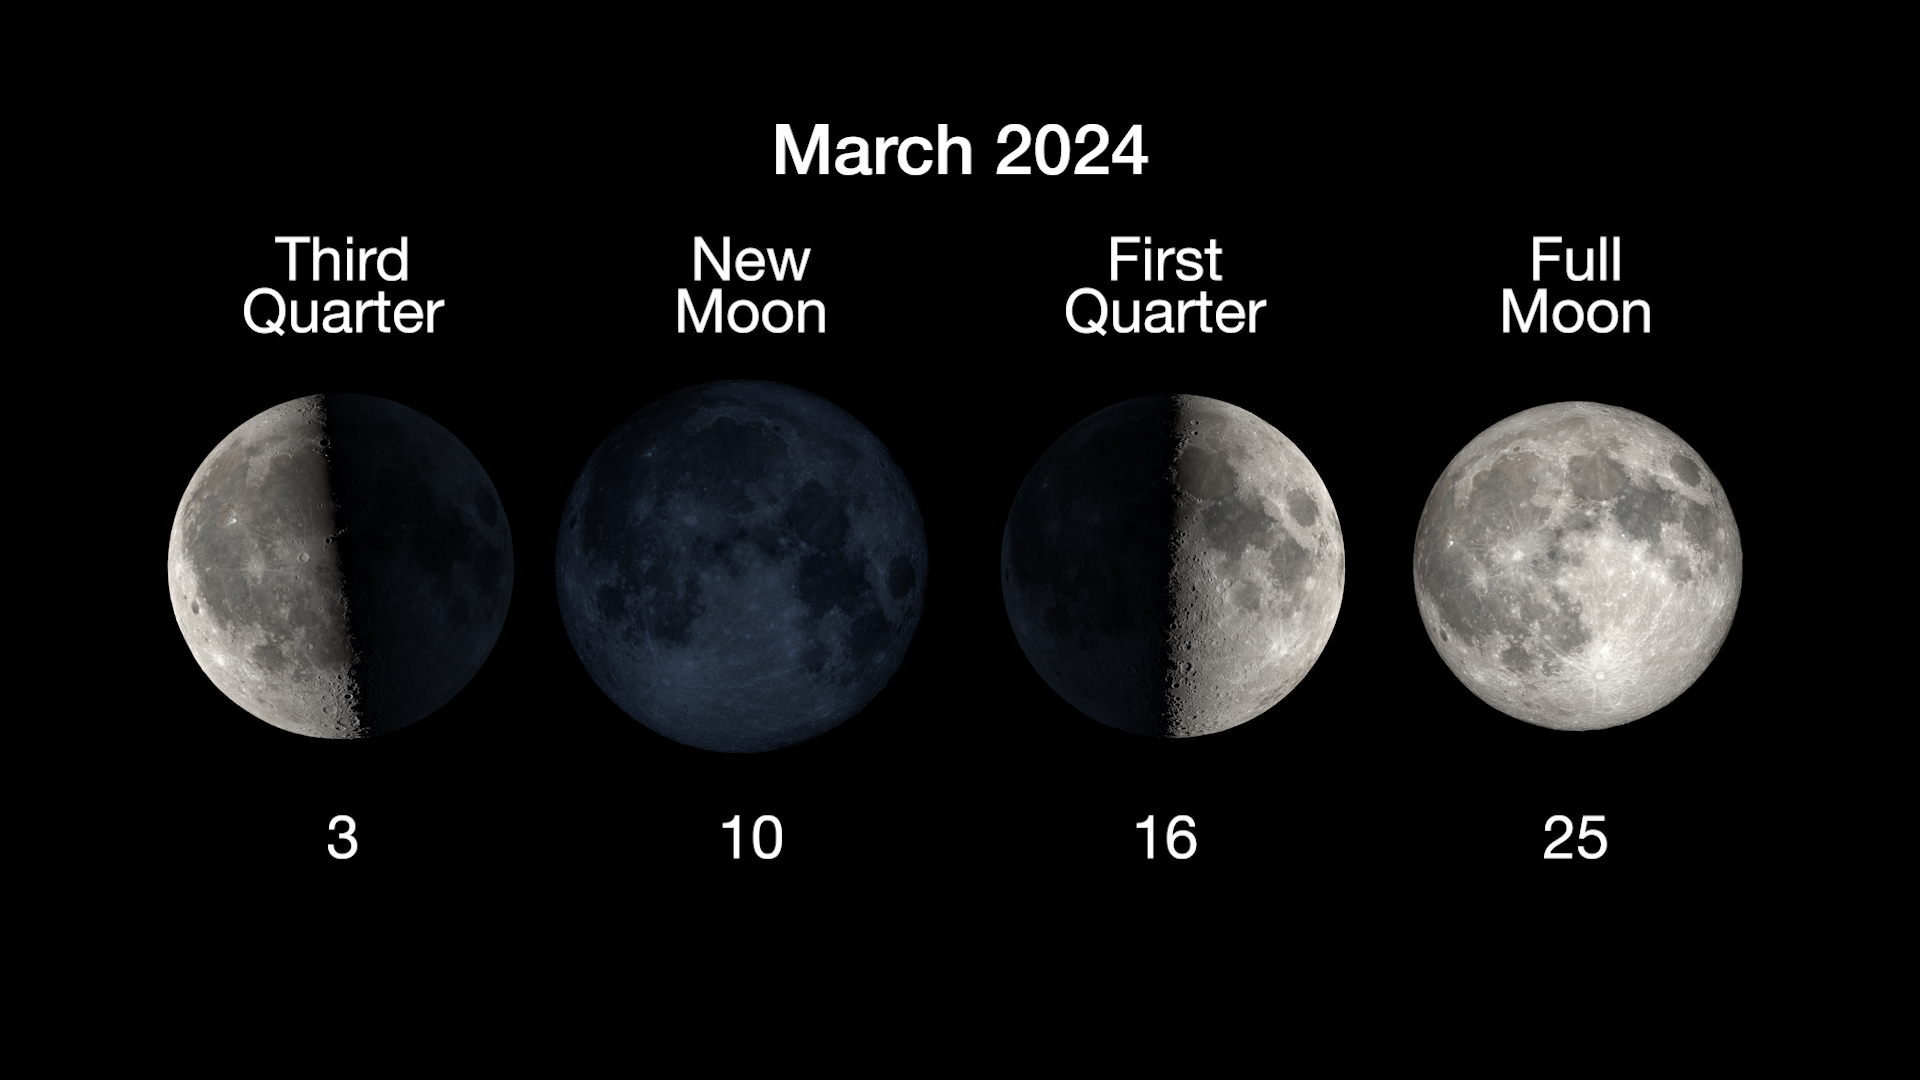 The main phases of the Moon are illustrated in a horizontal row, with the third quarter moon on March 3rd, new moon on March 10th, first quarter on March 16th, and full moon on March 25th.